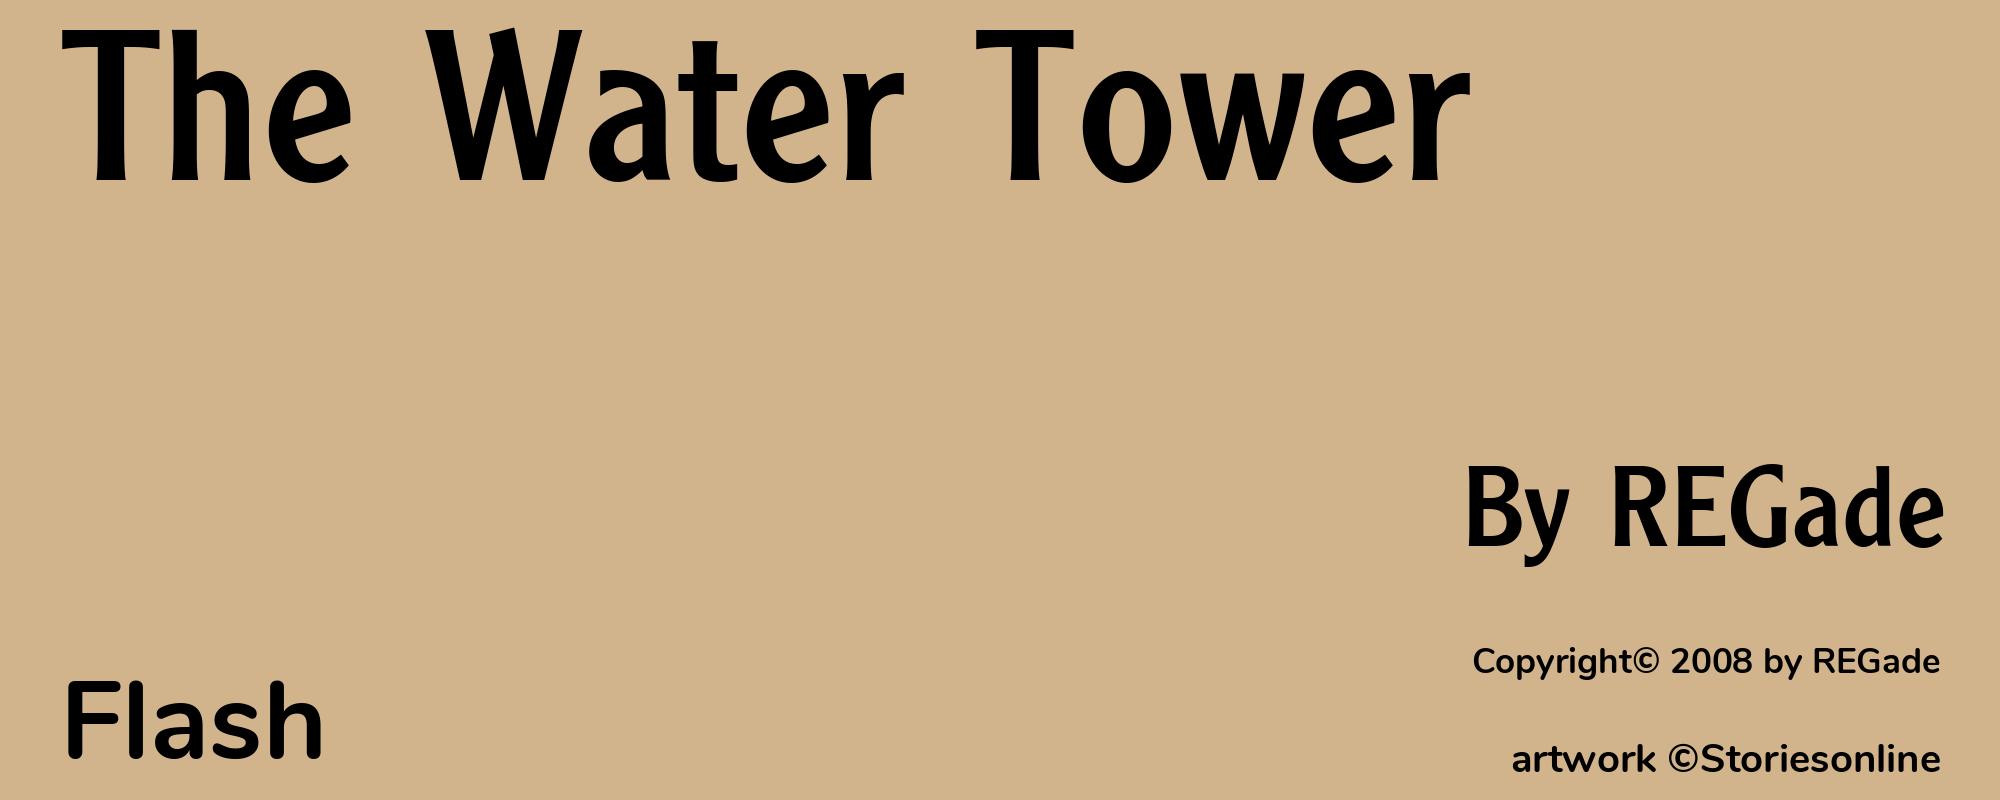 The Water Tower - Cover